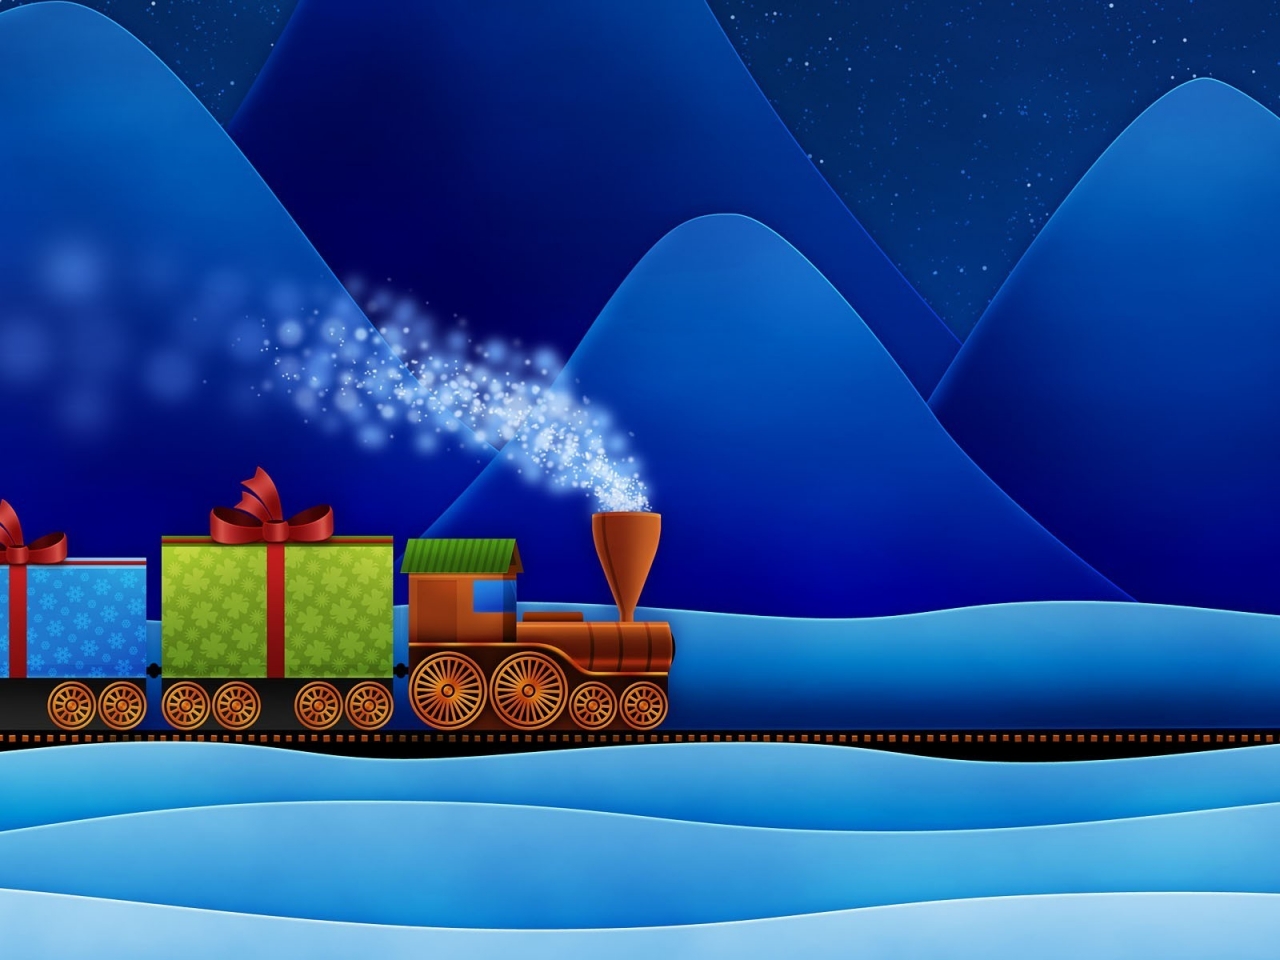 Train with Gifts for 1280 x 960 resolution